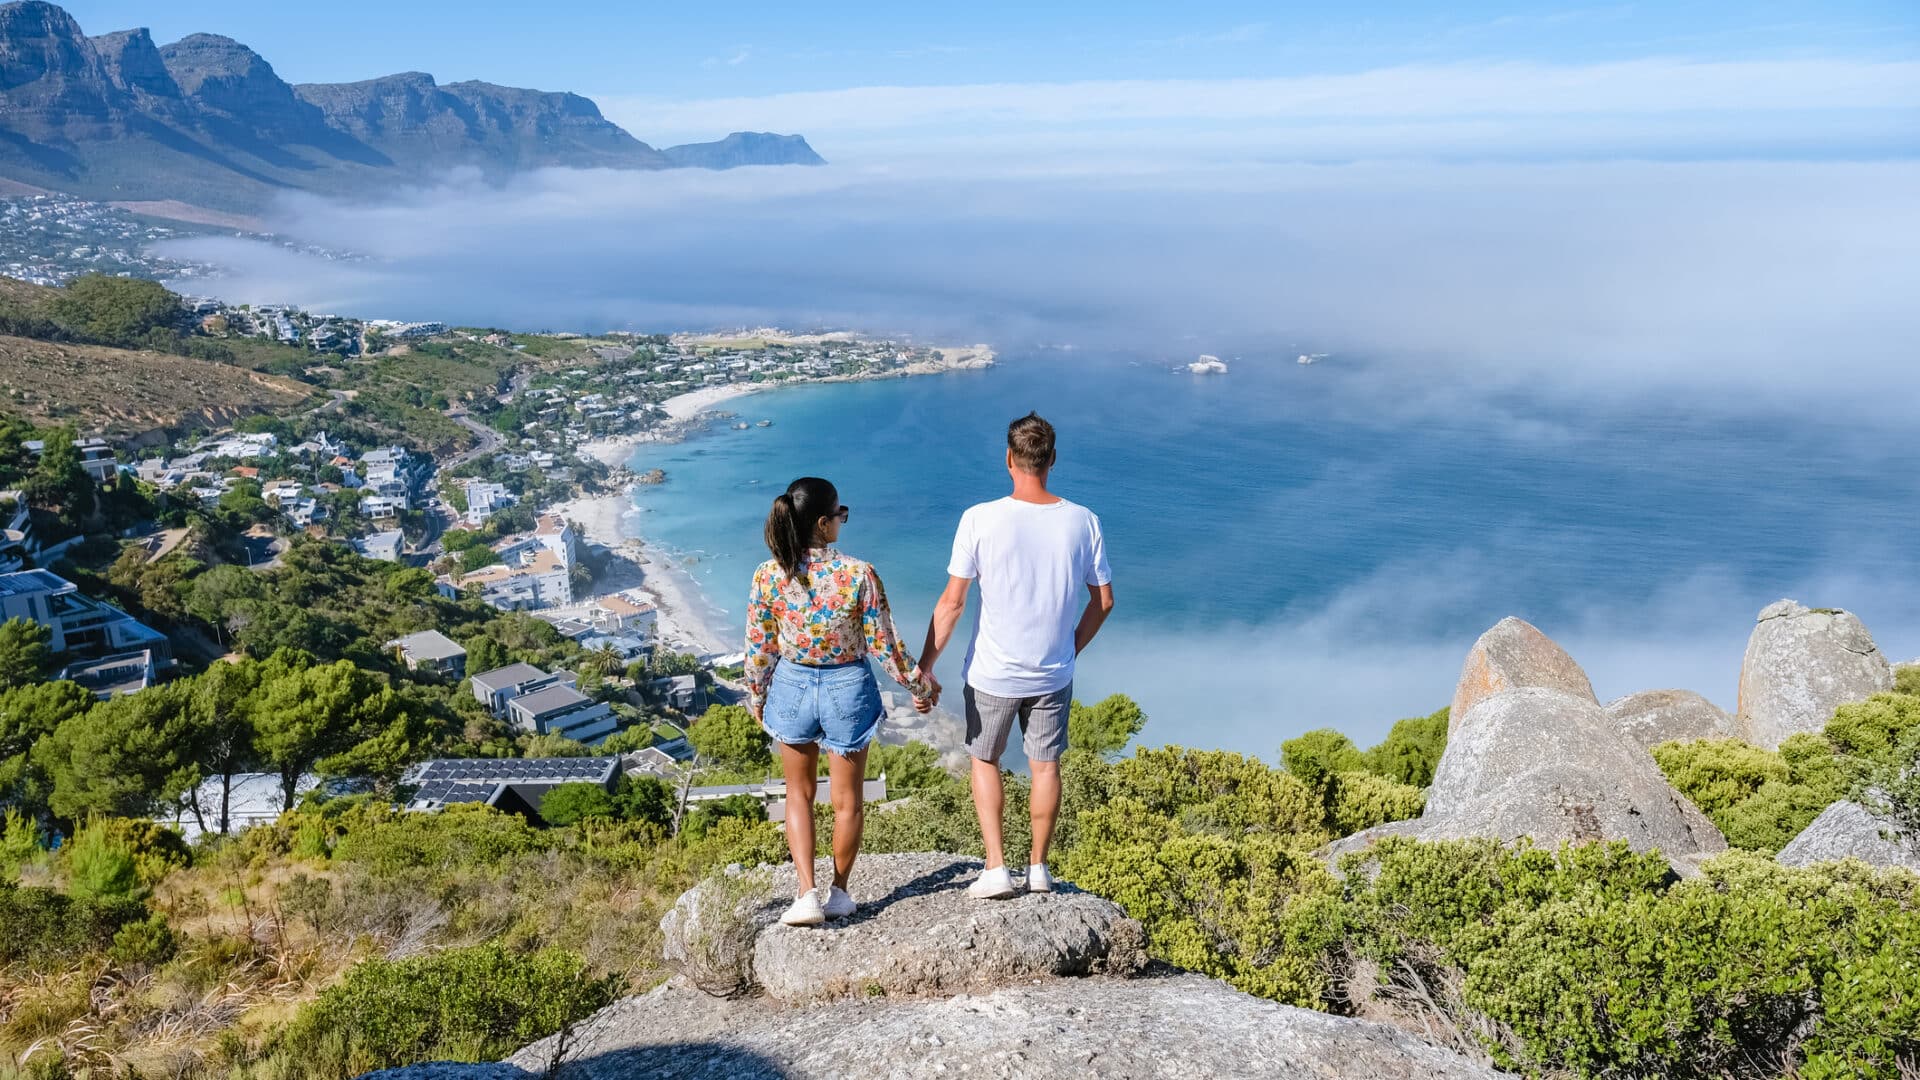 View from The Rock viewpoint in Cape Town over Campsbay, view over Camps Bay with fog over the ocean. fog coming in from ocean at Camps Bay Cape Town